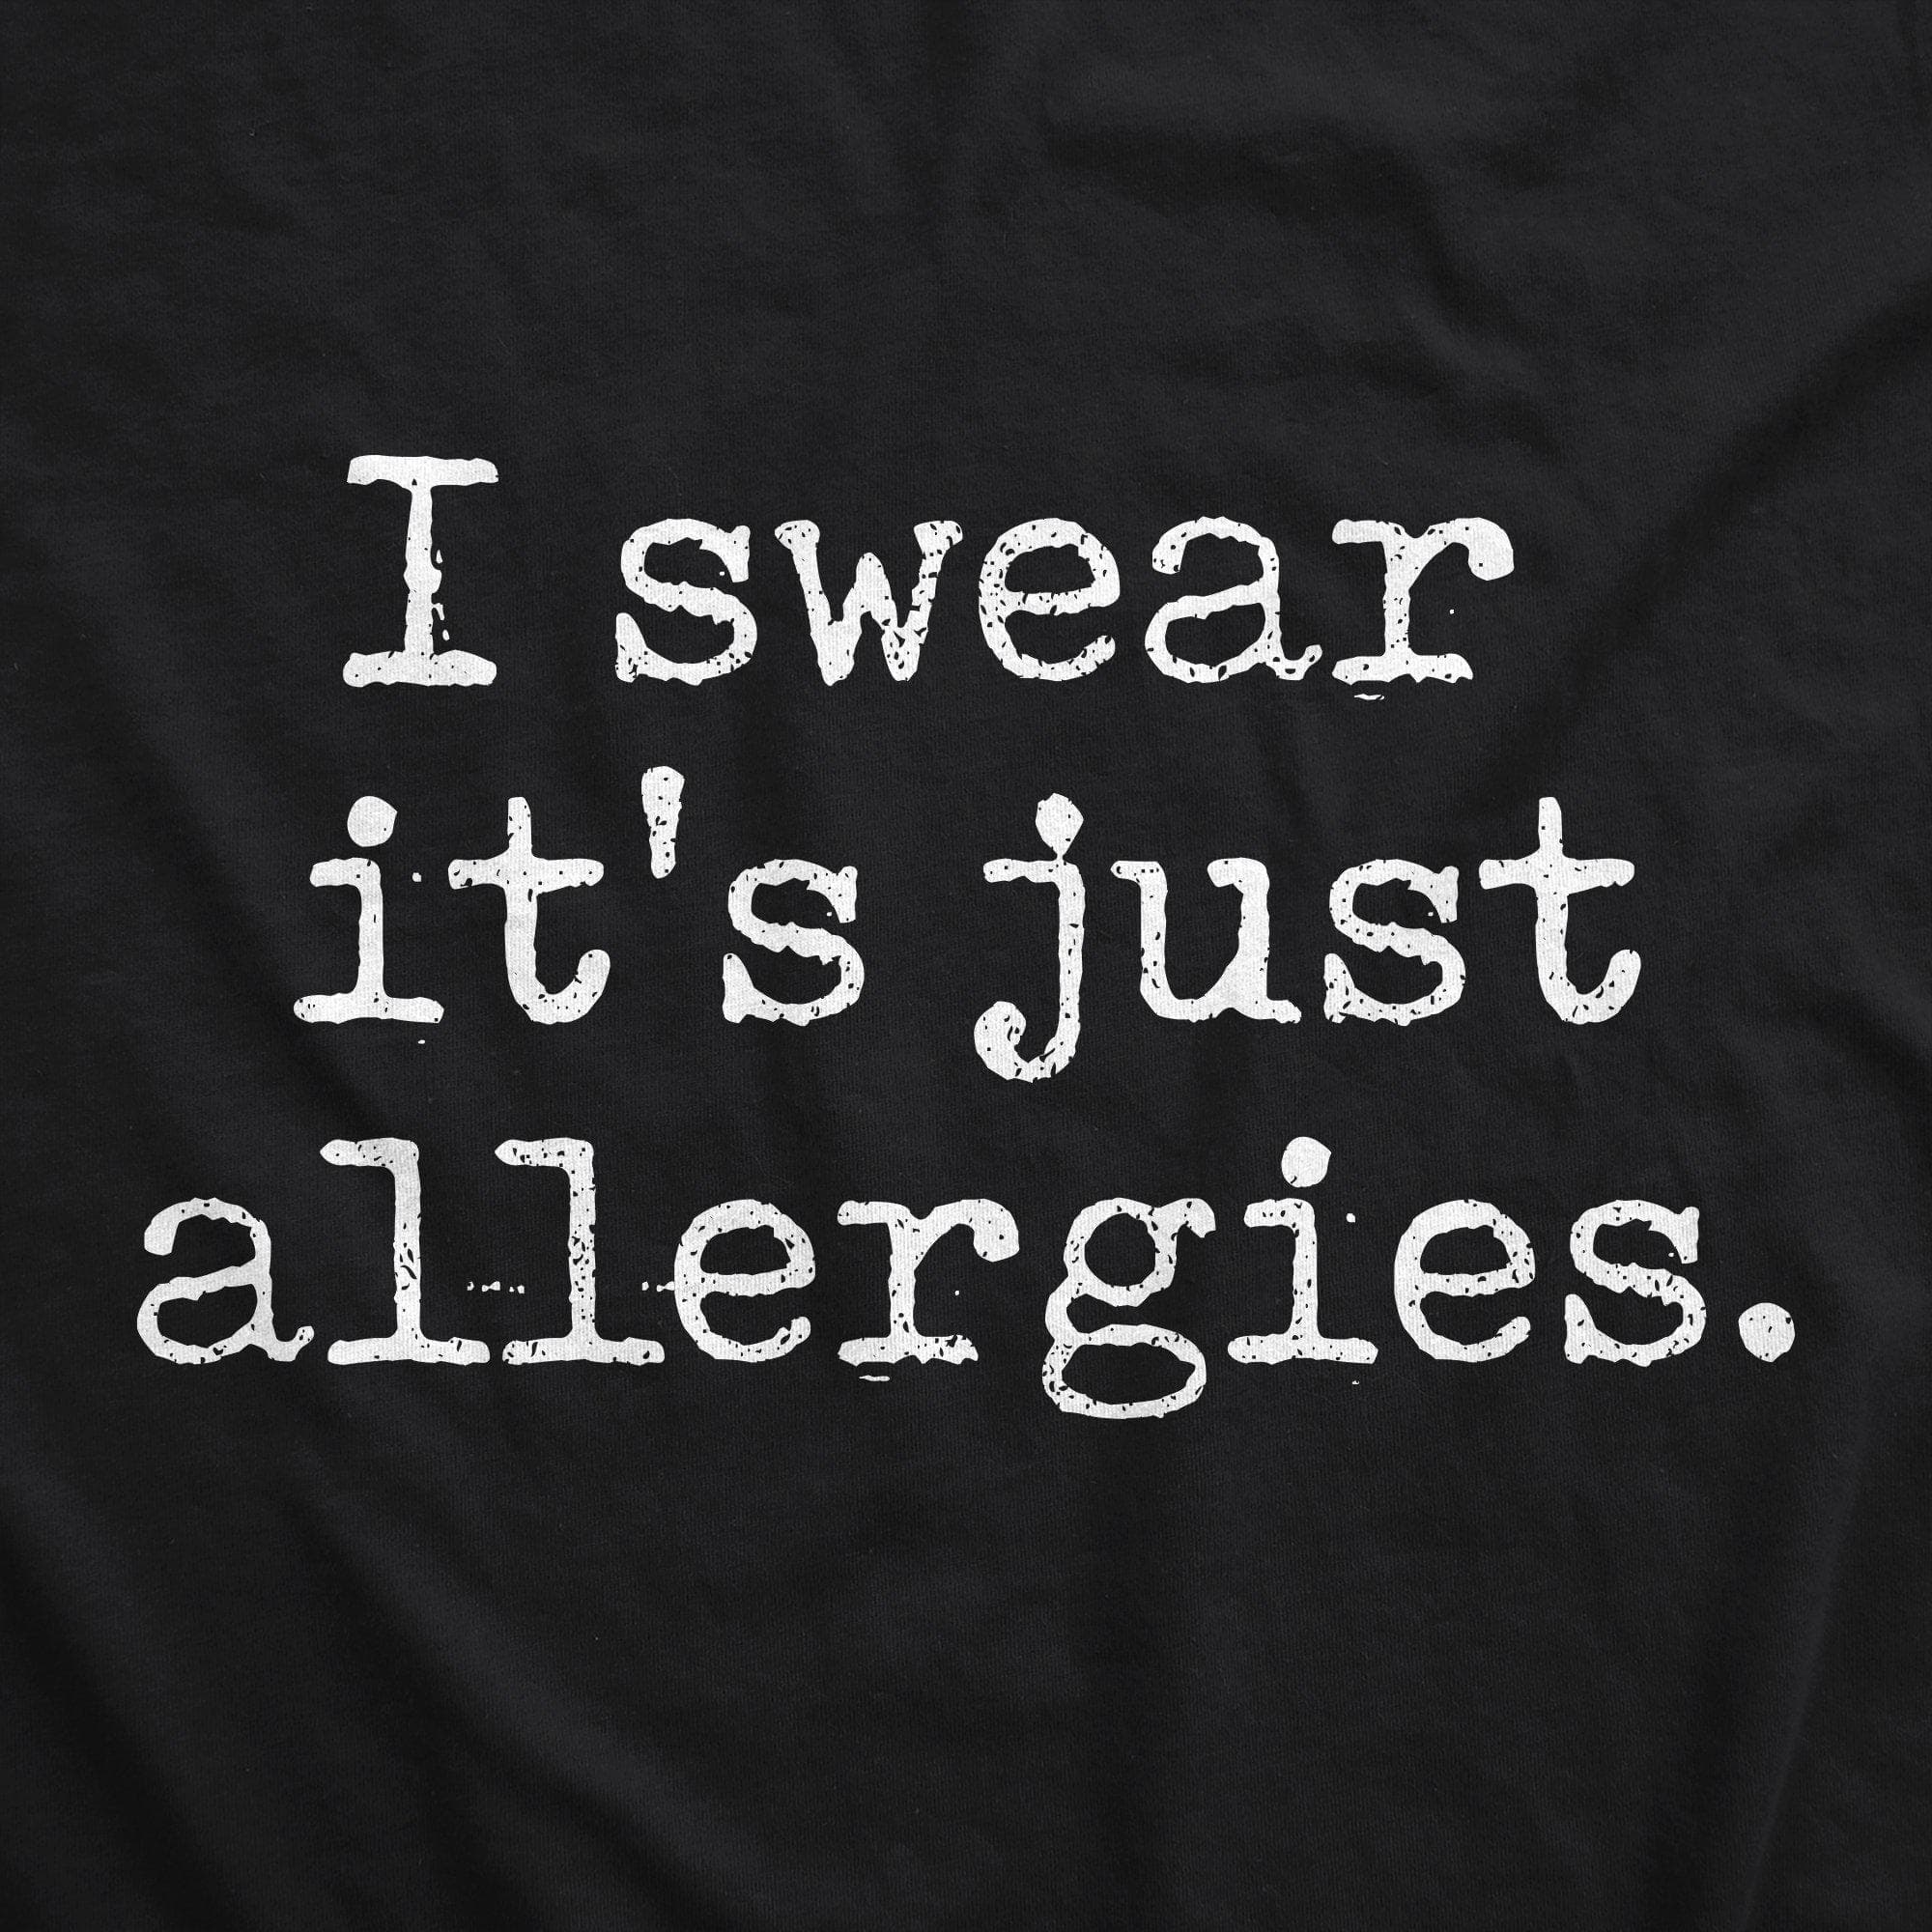 I Swear It's Just Allergies Face Mask Mask - Crazy Dog T-Shirts